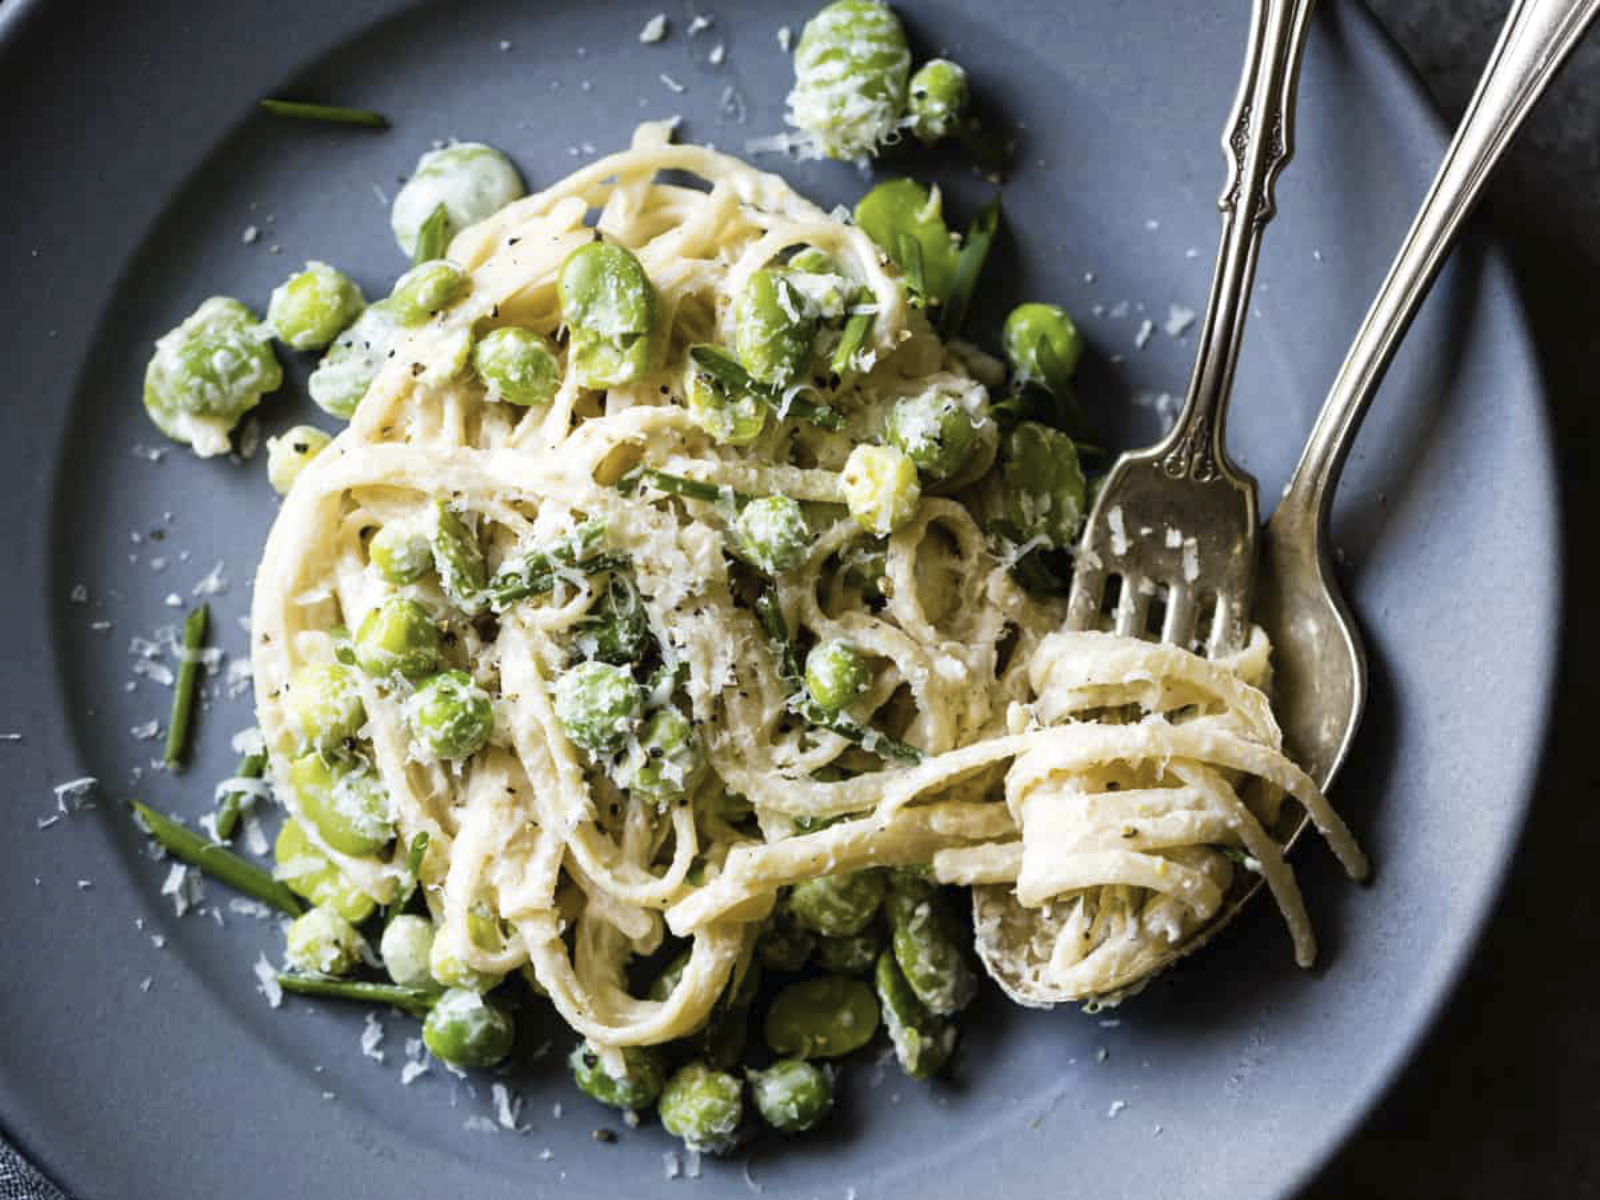 Creamy Cashew-Miso Pasta with Peas and Fava Beans